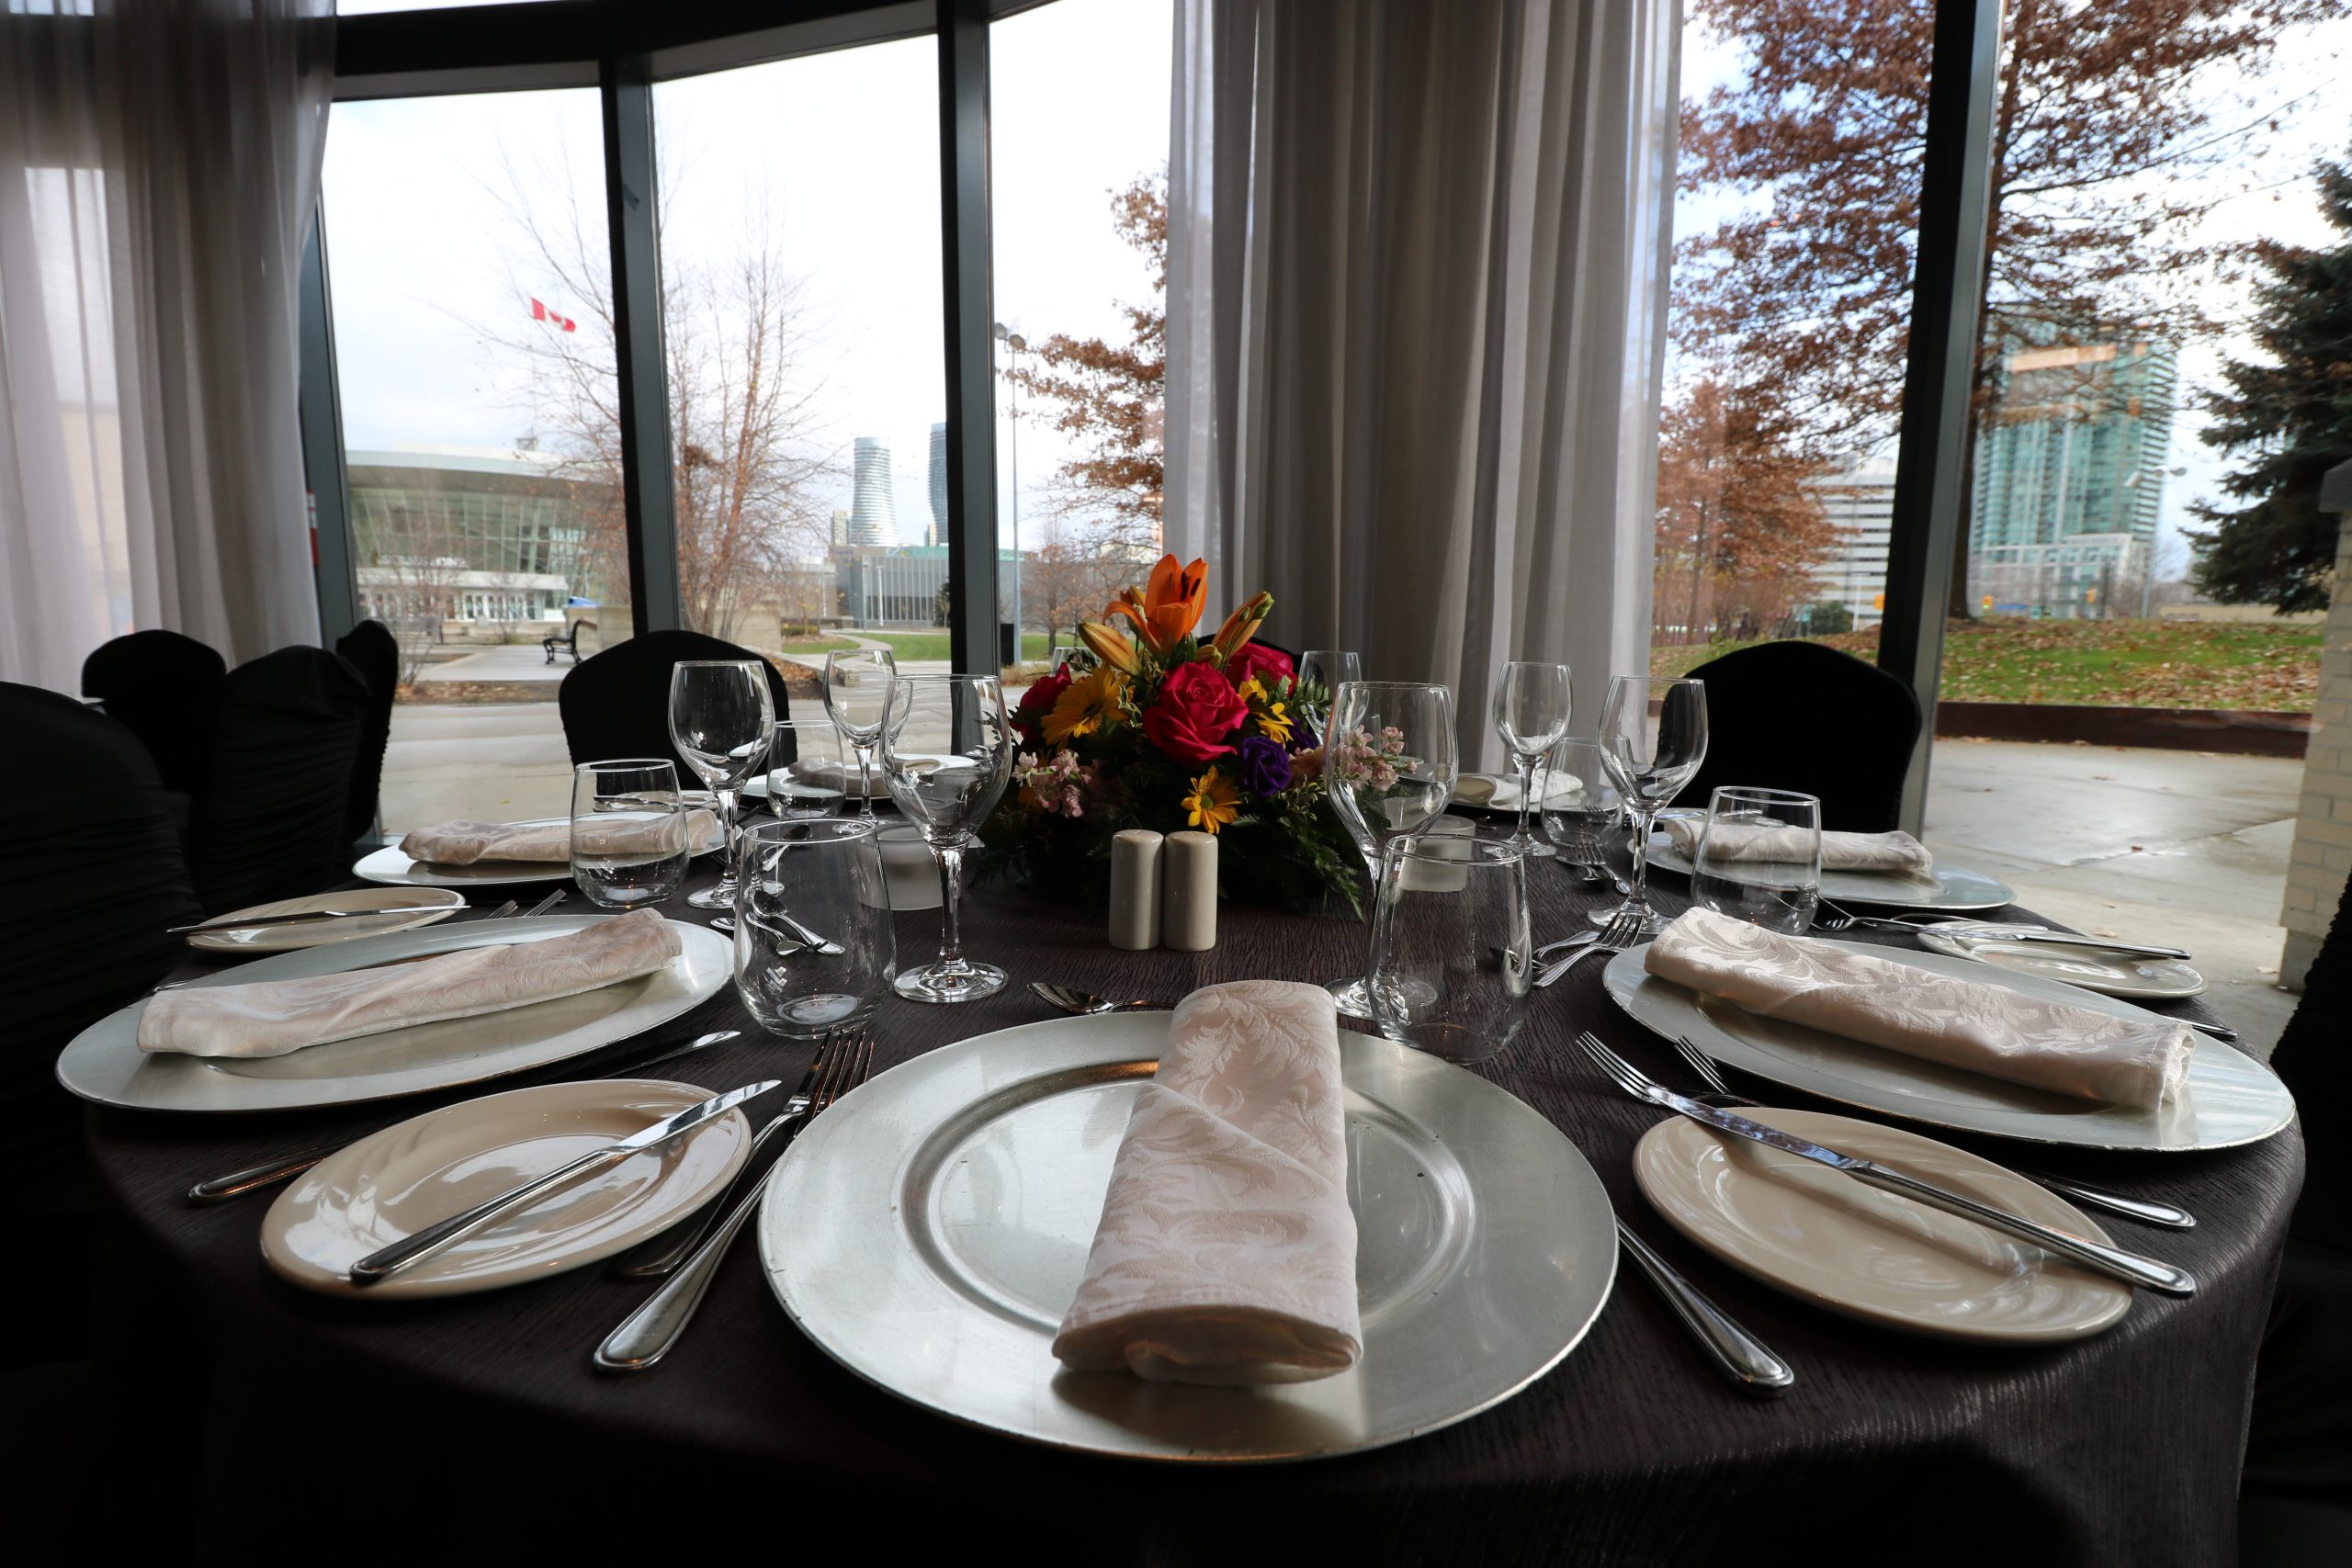 Table settings on round table with black cloth